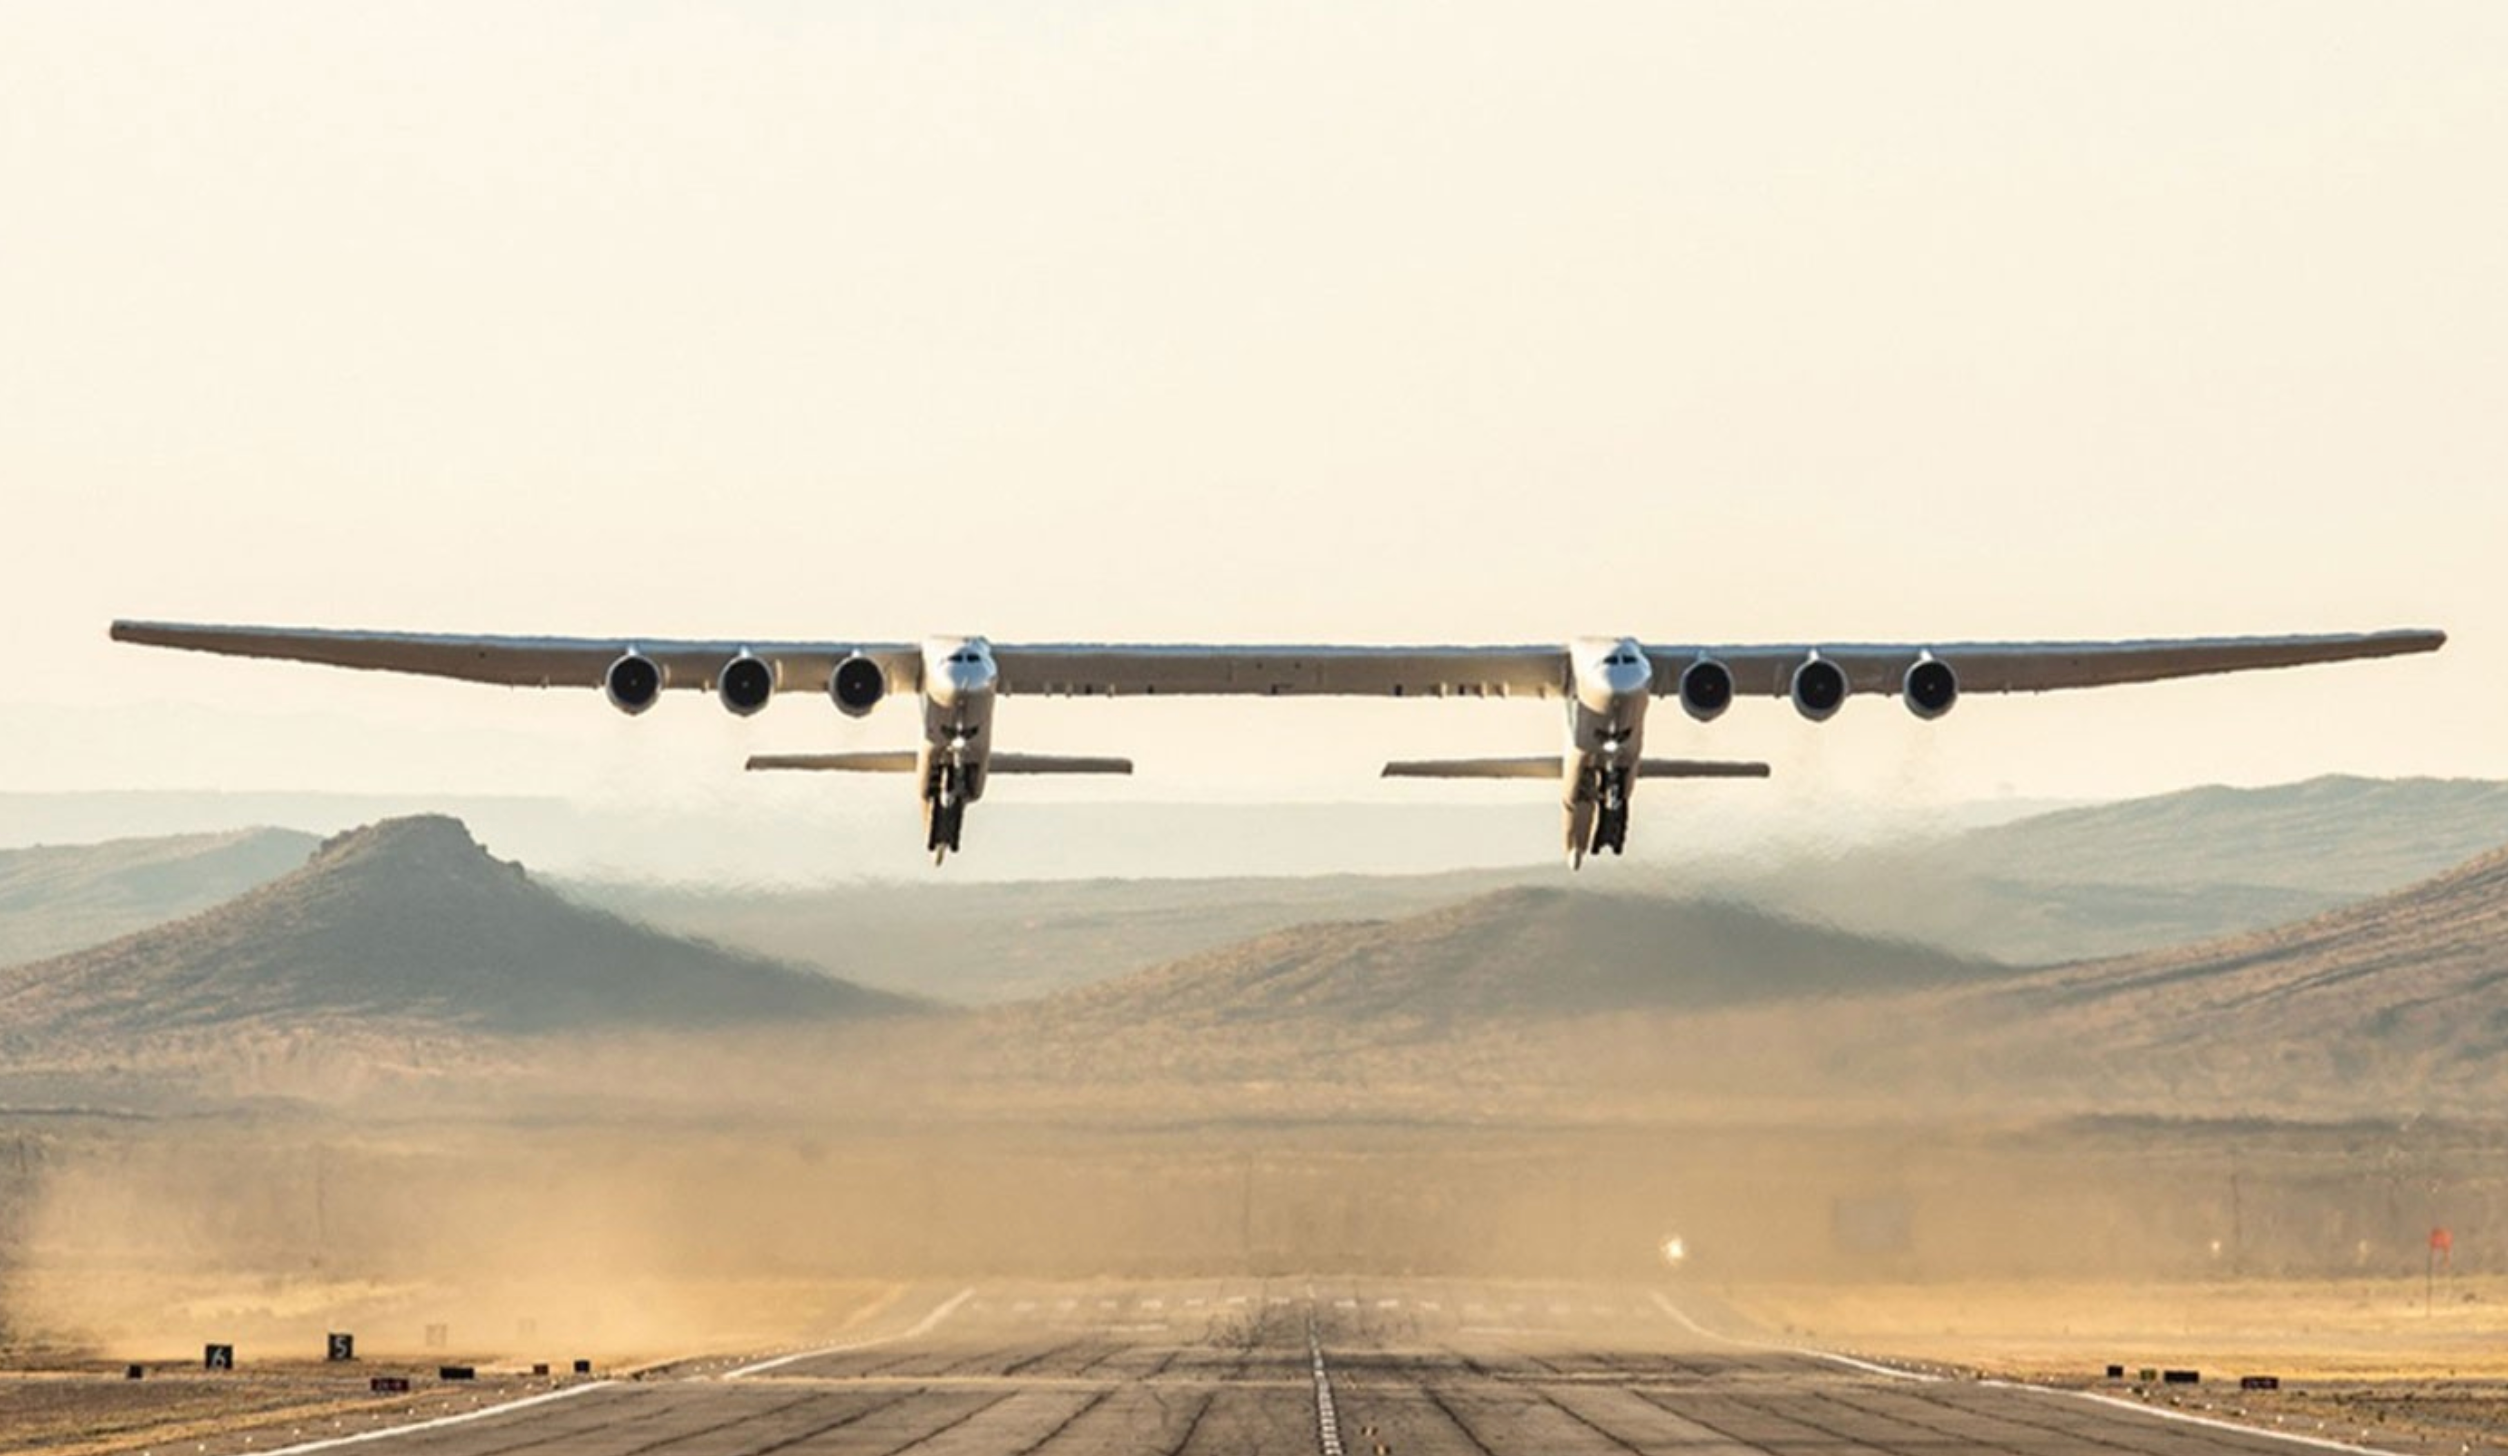 The World's Largest Aircraft Completes Fourth Flight Test